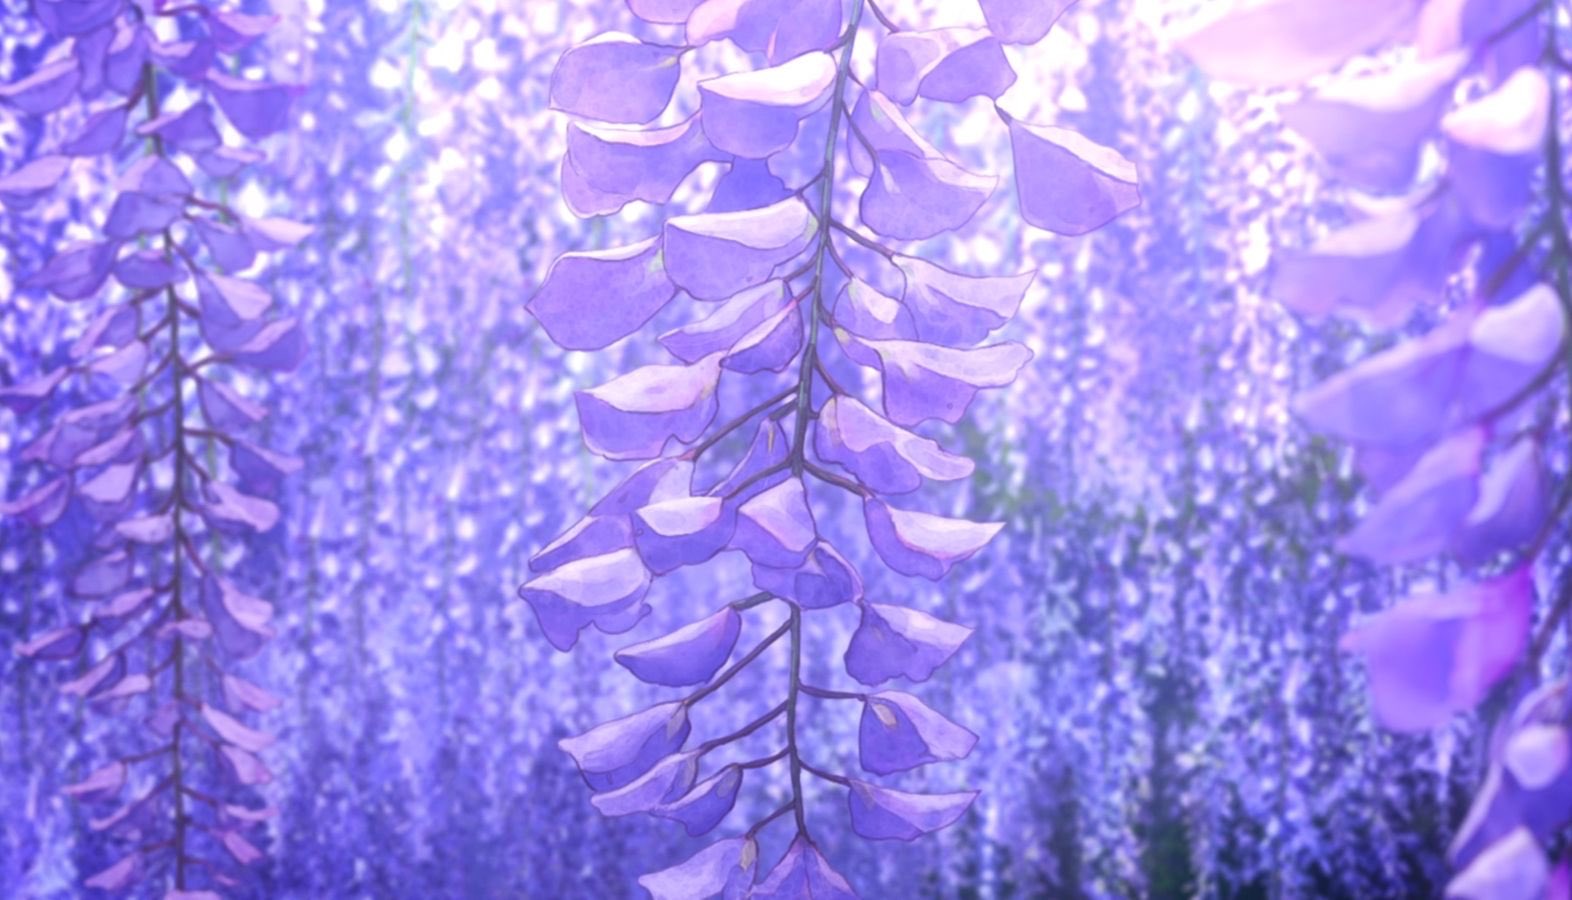 Dragon On The Wisteria Flowers In Demon Slayer Looks So